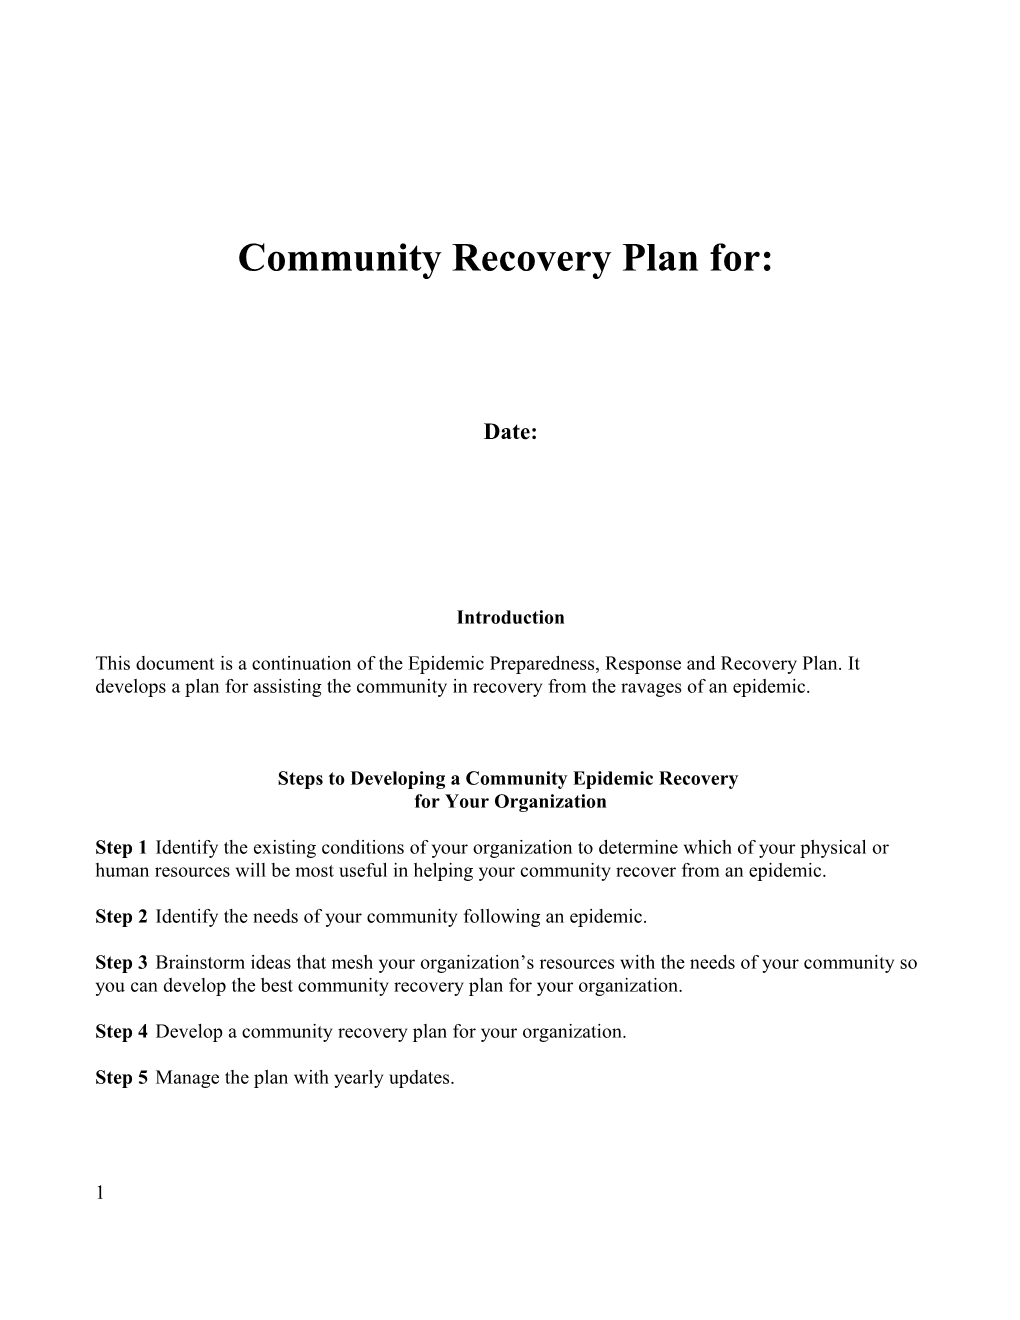 Community Recovery Plan For